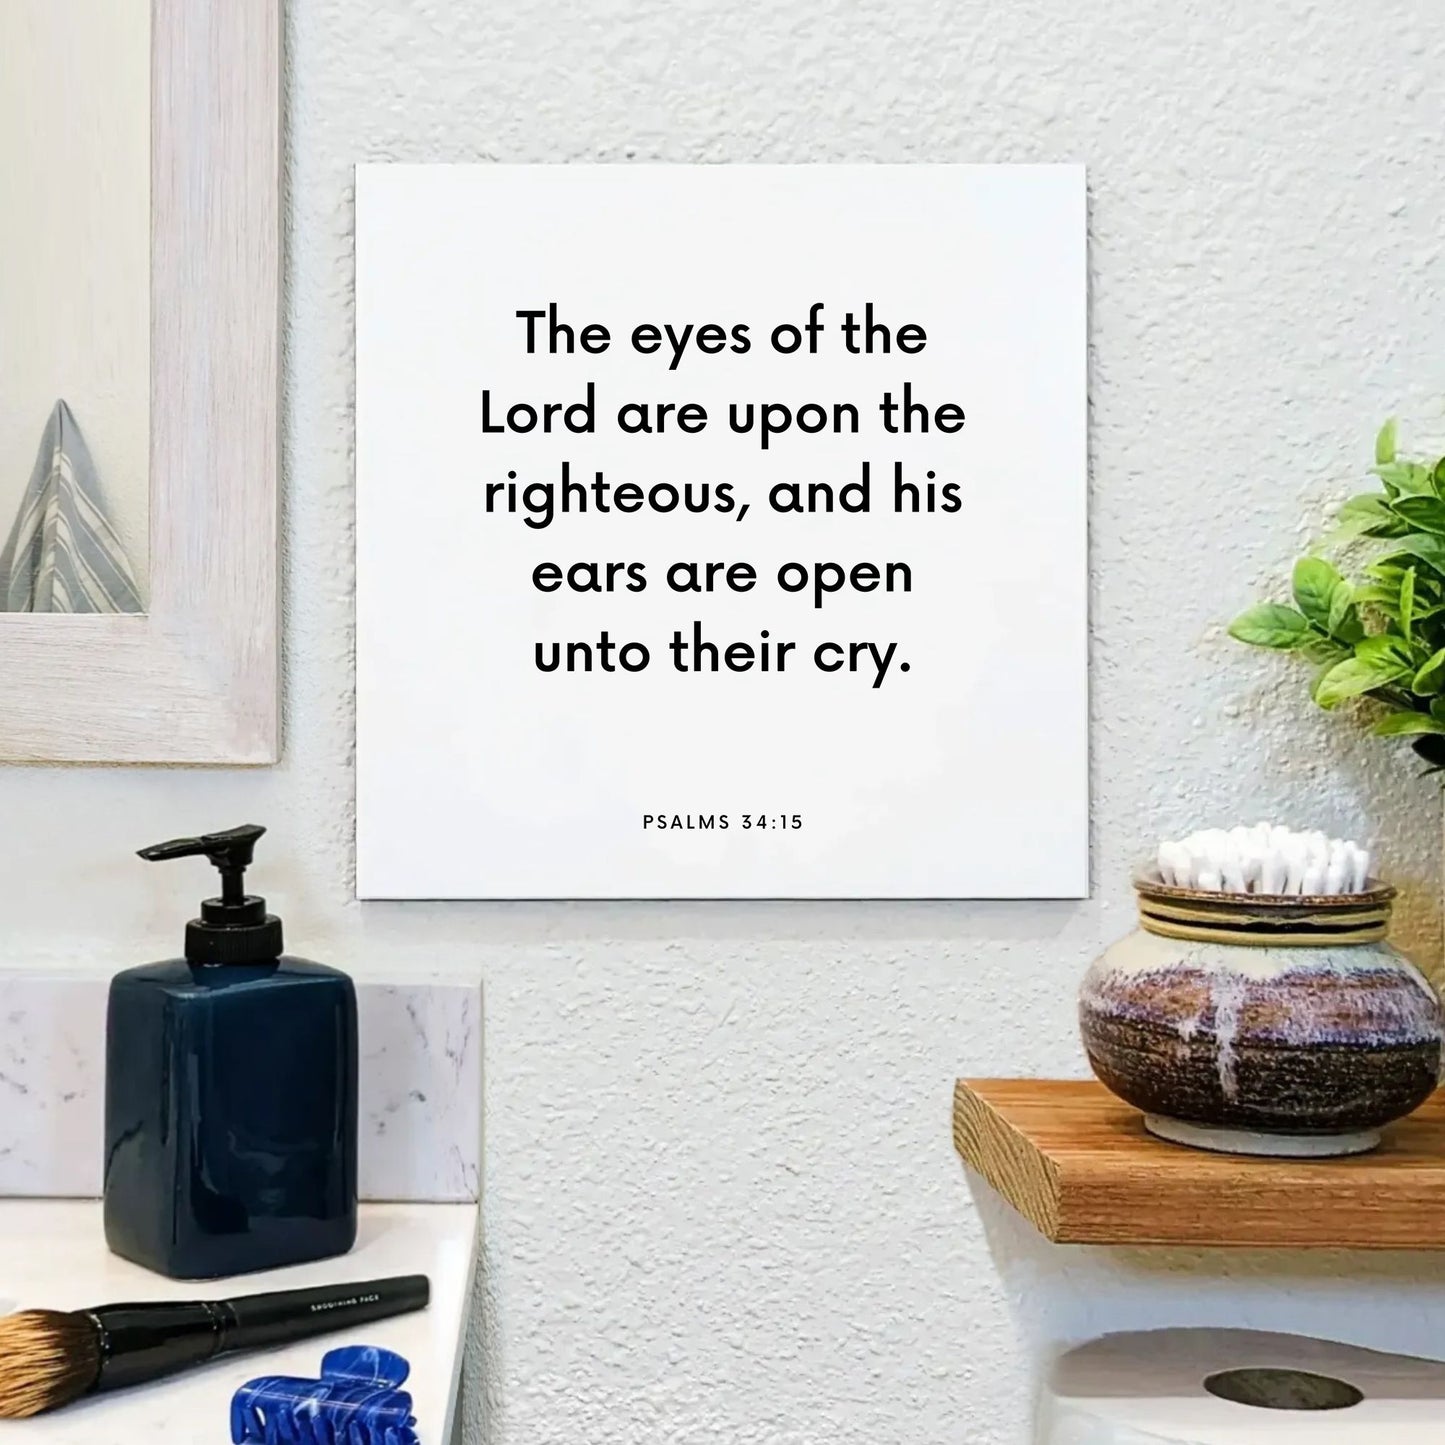 Bathroom mouting of the scripture tile for Psalms 34:15 - "The eyes of the Lord are upon the righteous"